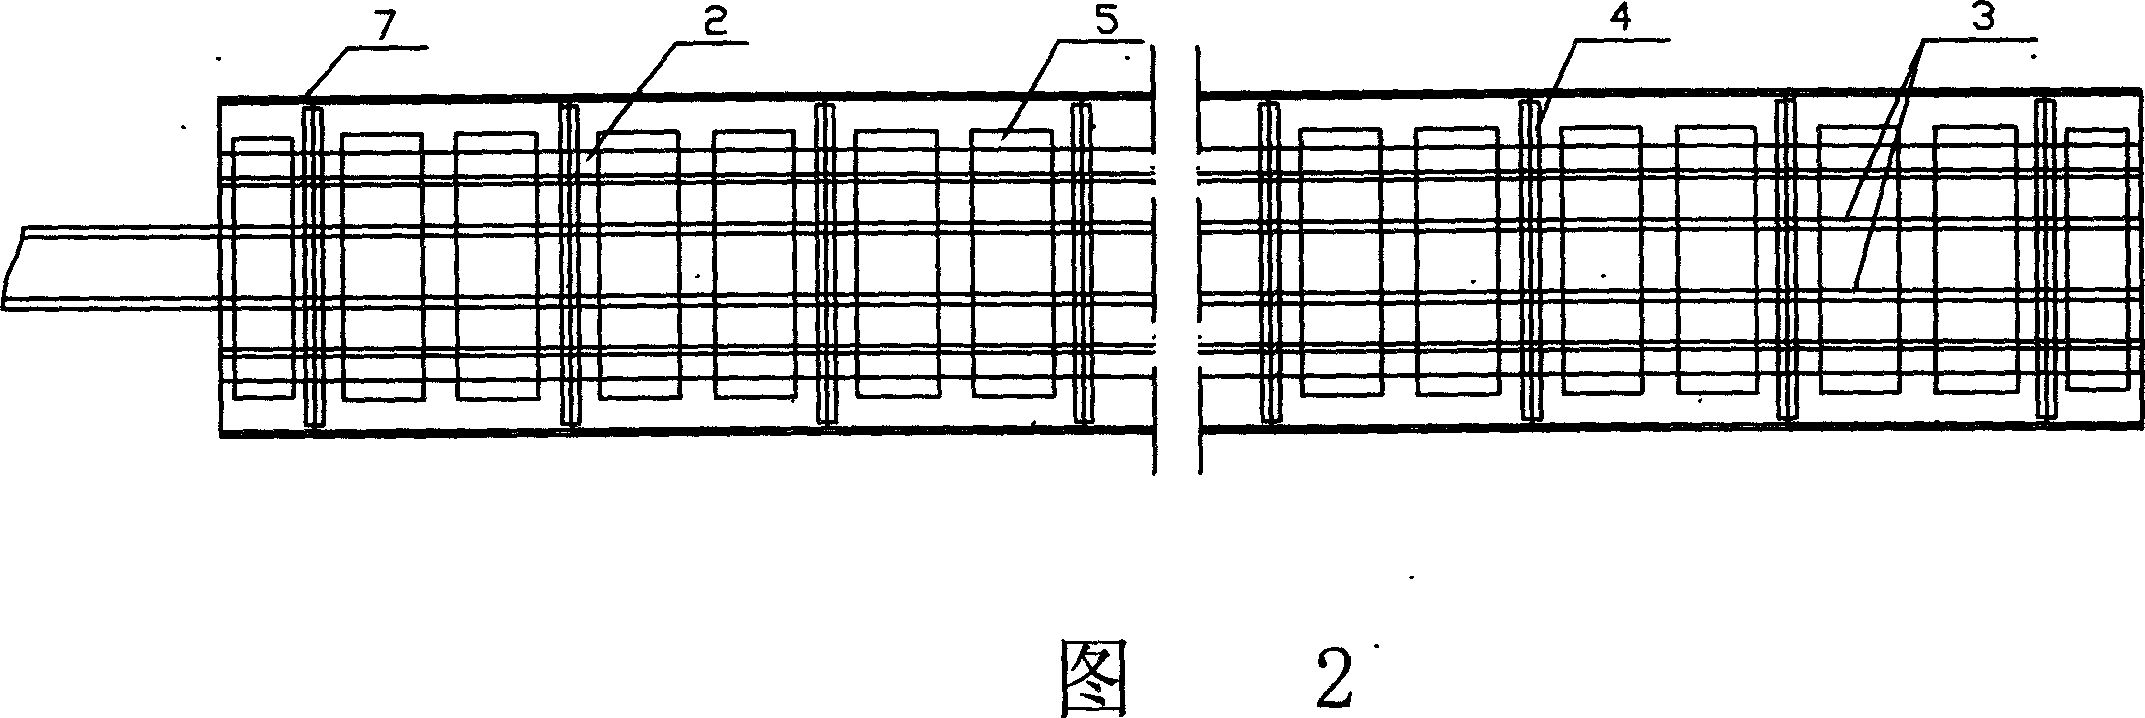 On-line thermal-insulating quenching apparatus and process